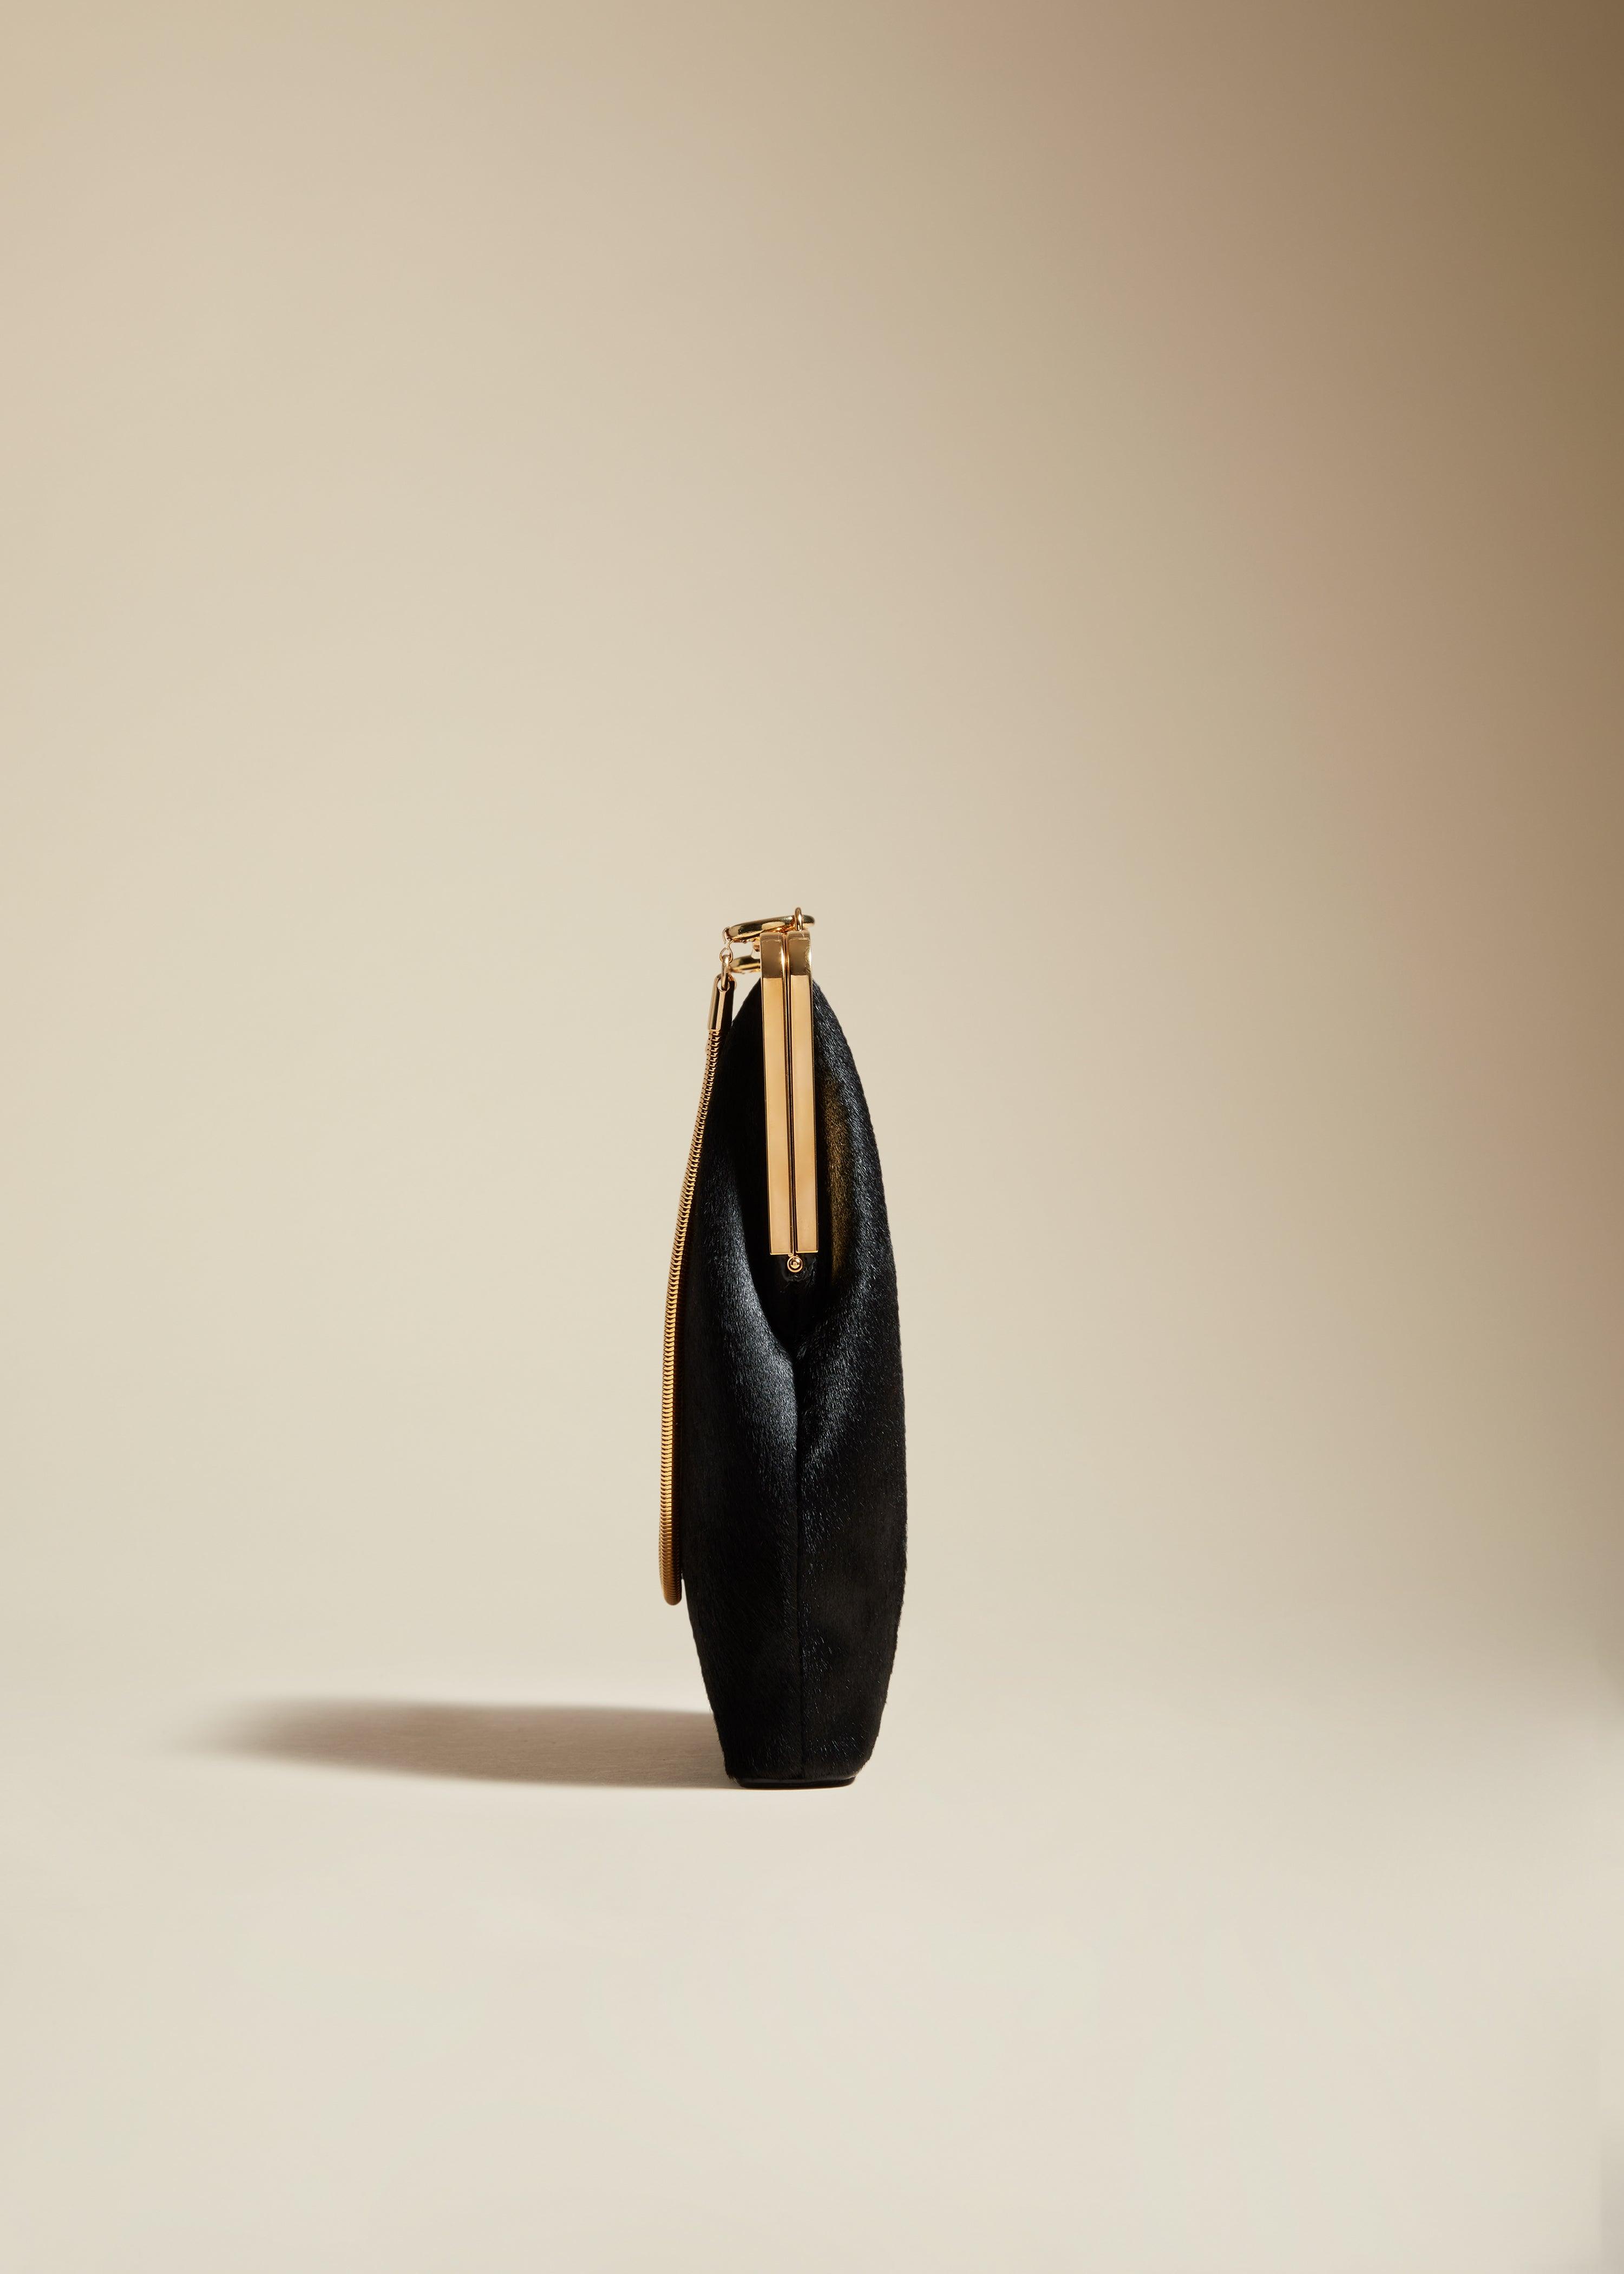 The Lilith Evening Bag in Black Haircalf - The Iconic Issue